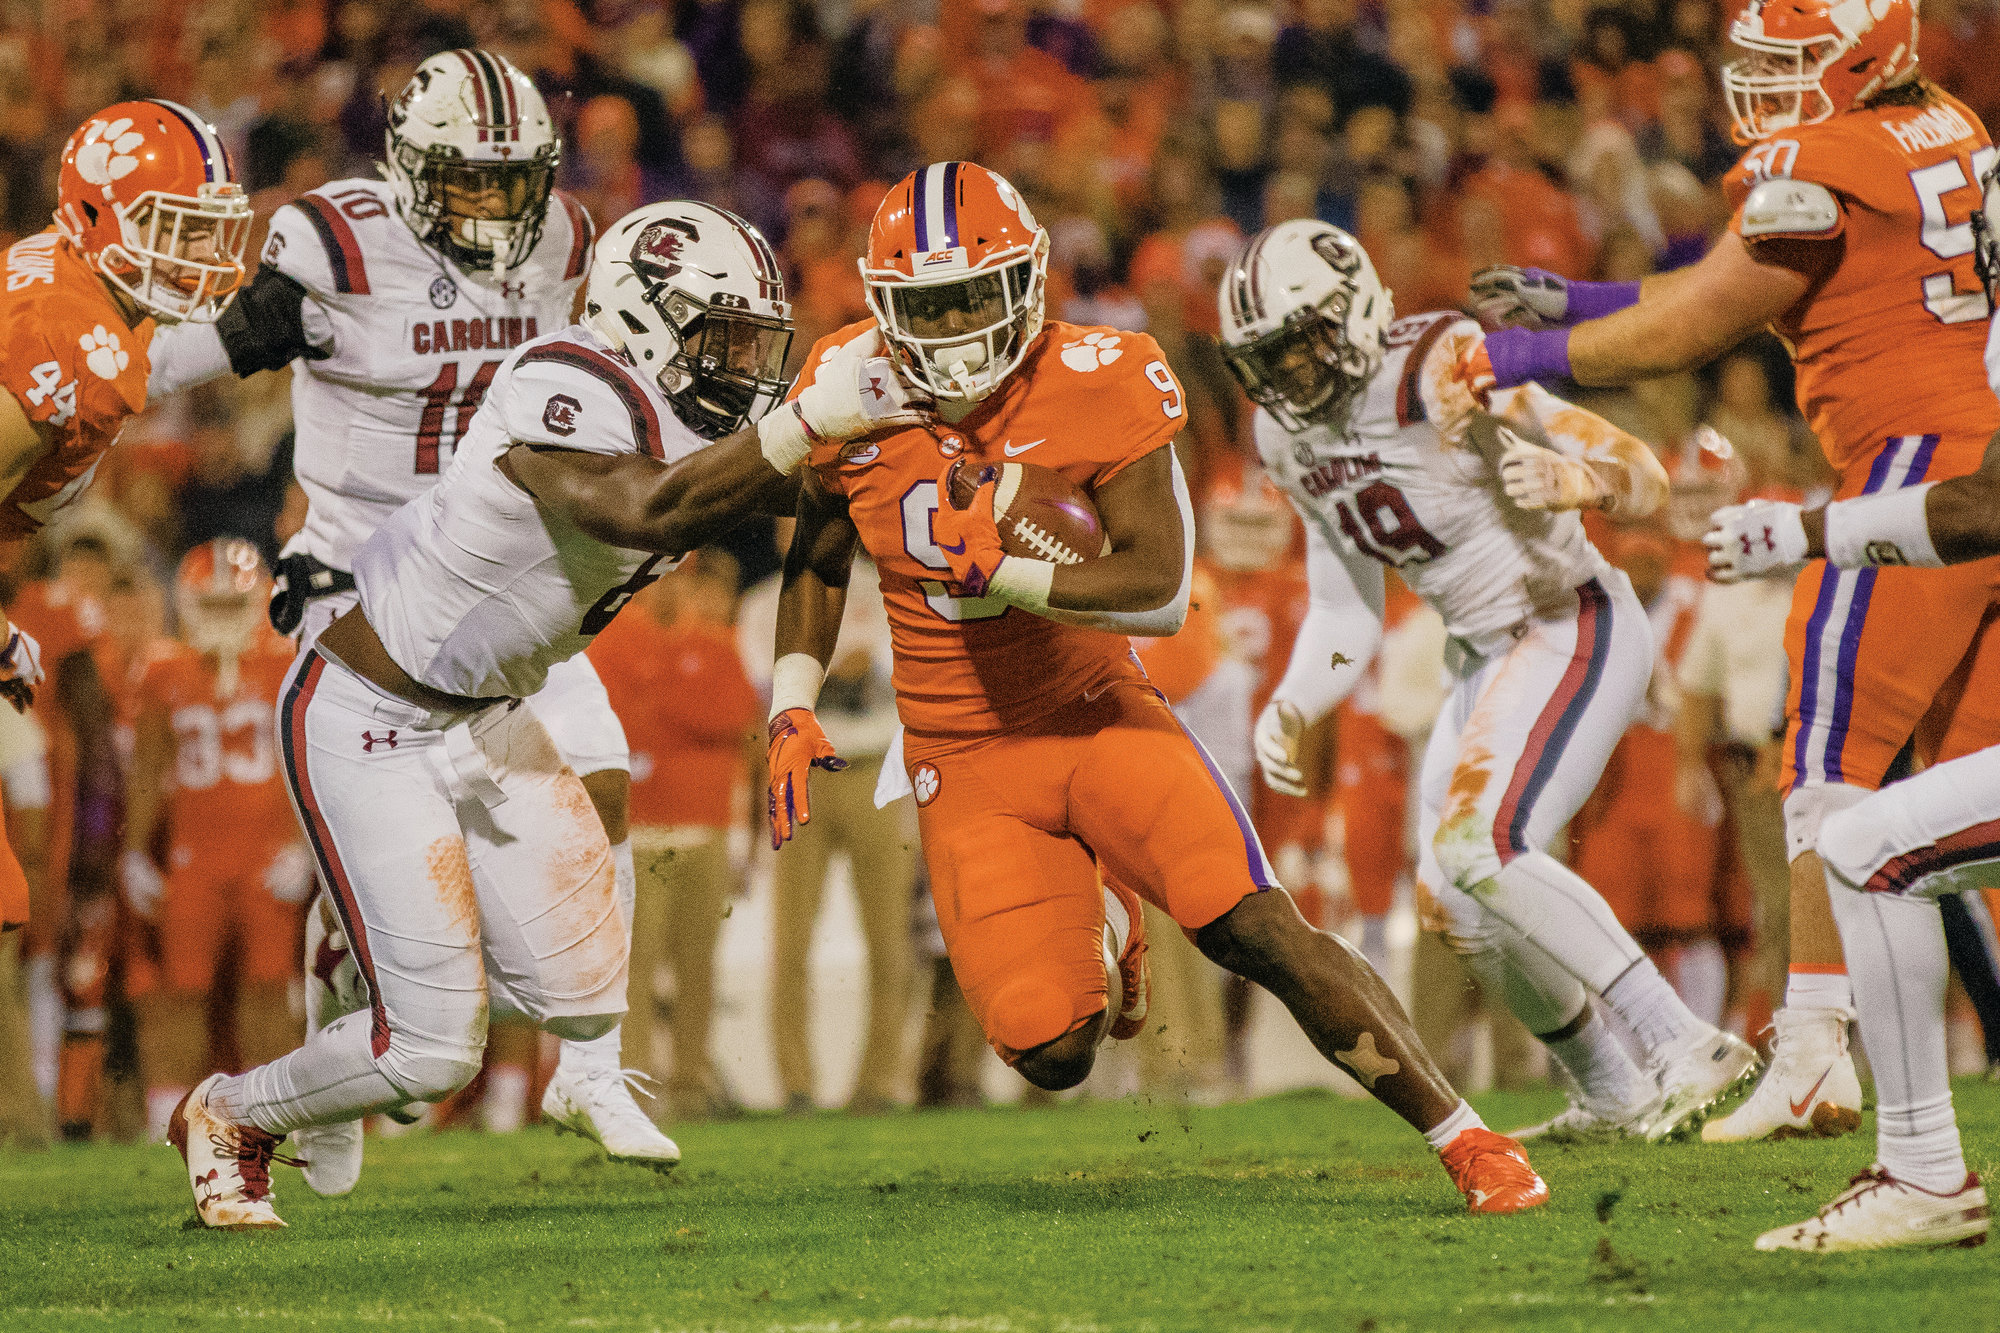 MICAH GREEN / THE SUMTER ITEM  Clemson running back Travis Etienne (9) runs the ball during the Tigers' 56-35 victory over South Carolina earlier this season in Clemson. Etienne earned ACC Offensive Player of the Year honors for his 2018 performance, joining 10 other Tigers on the All-ACC teams.